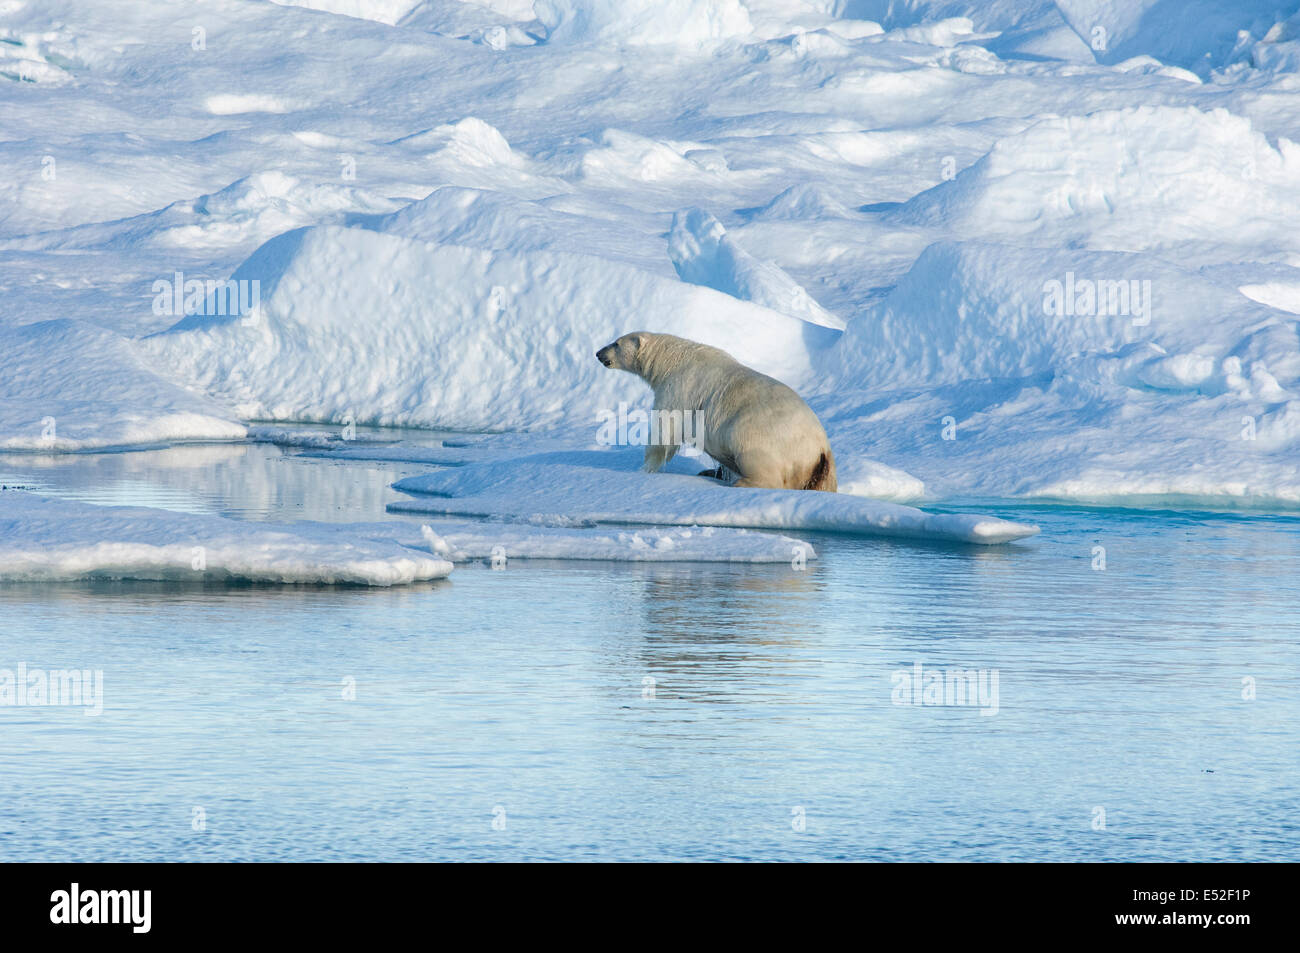 A polar bear climbing out of the water on to an ice floe. Stock Photo